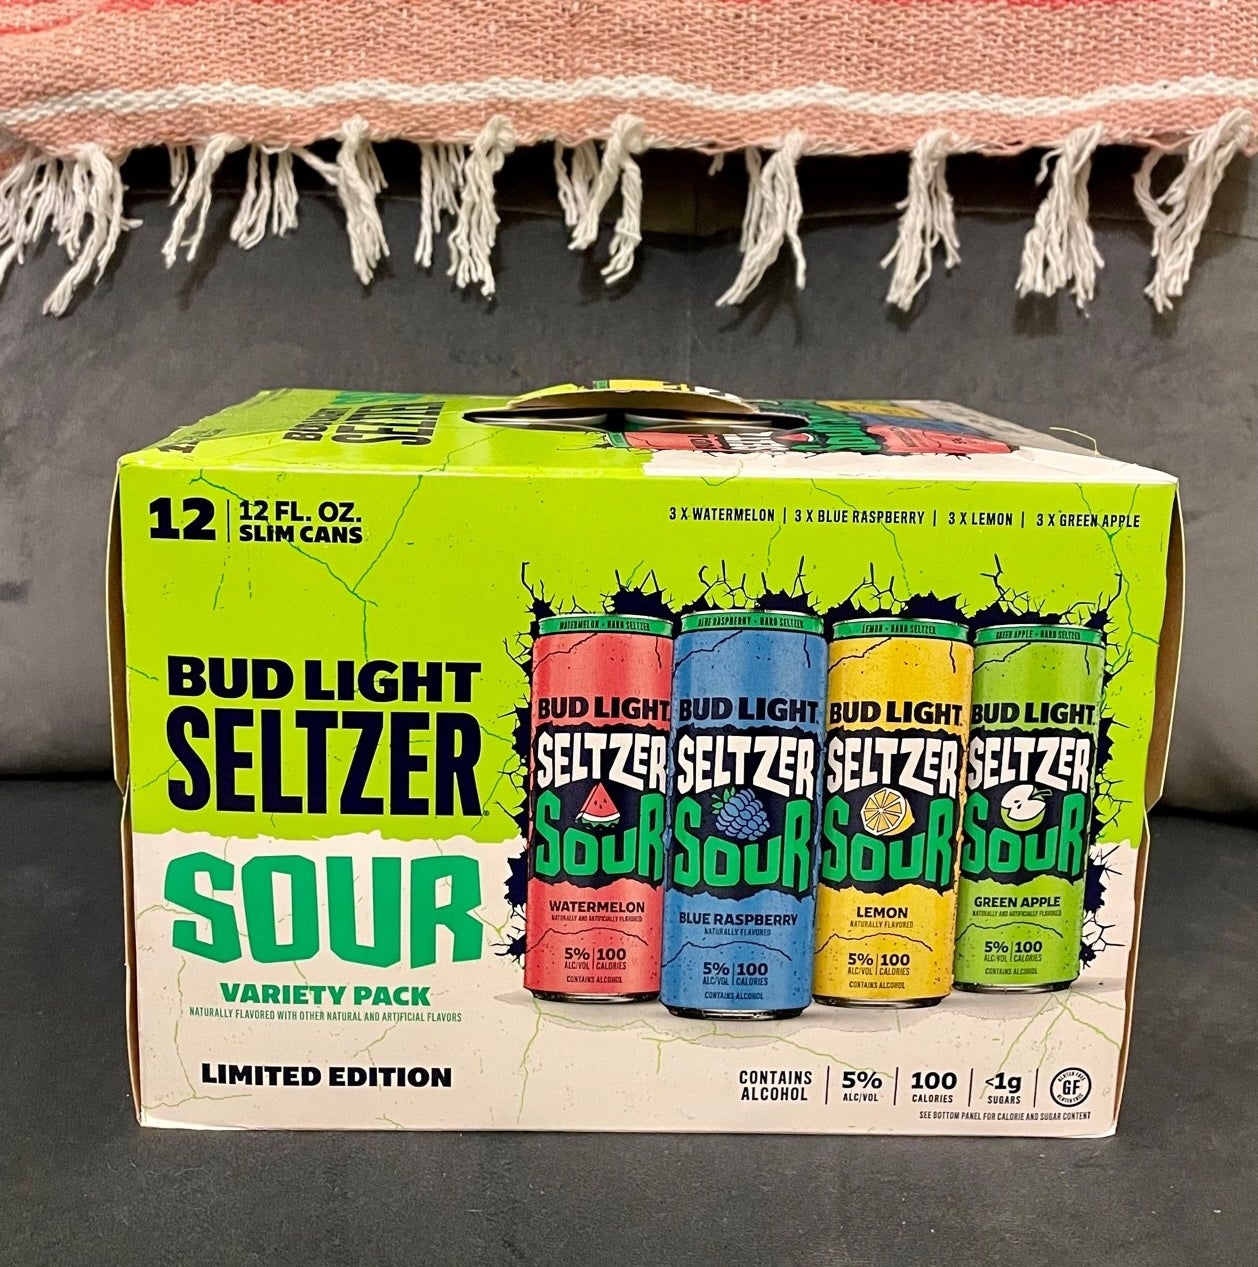 box of bud light sour seltzers